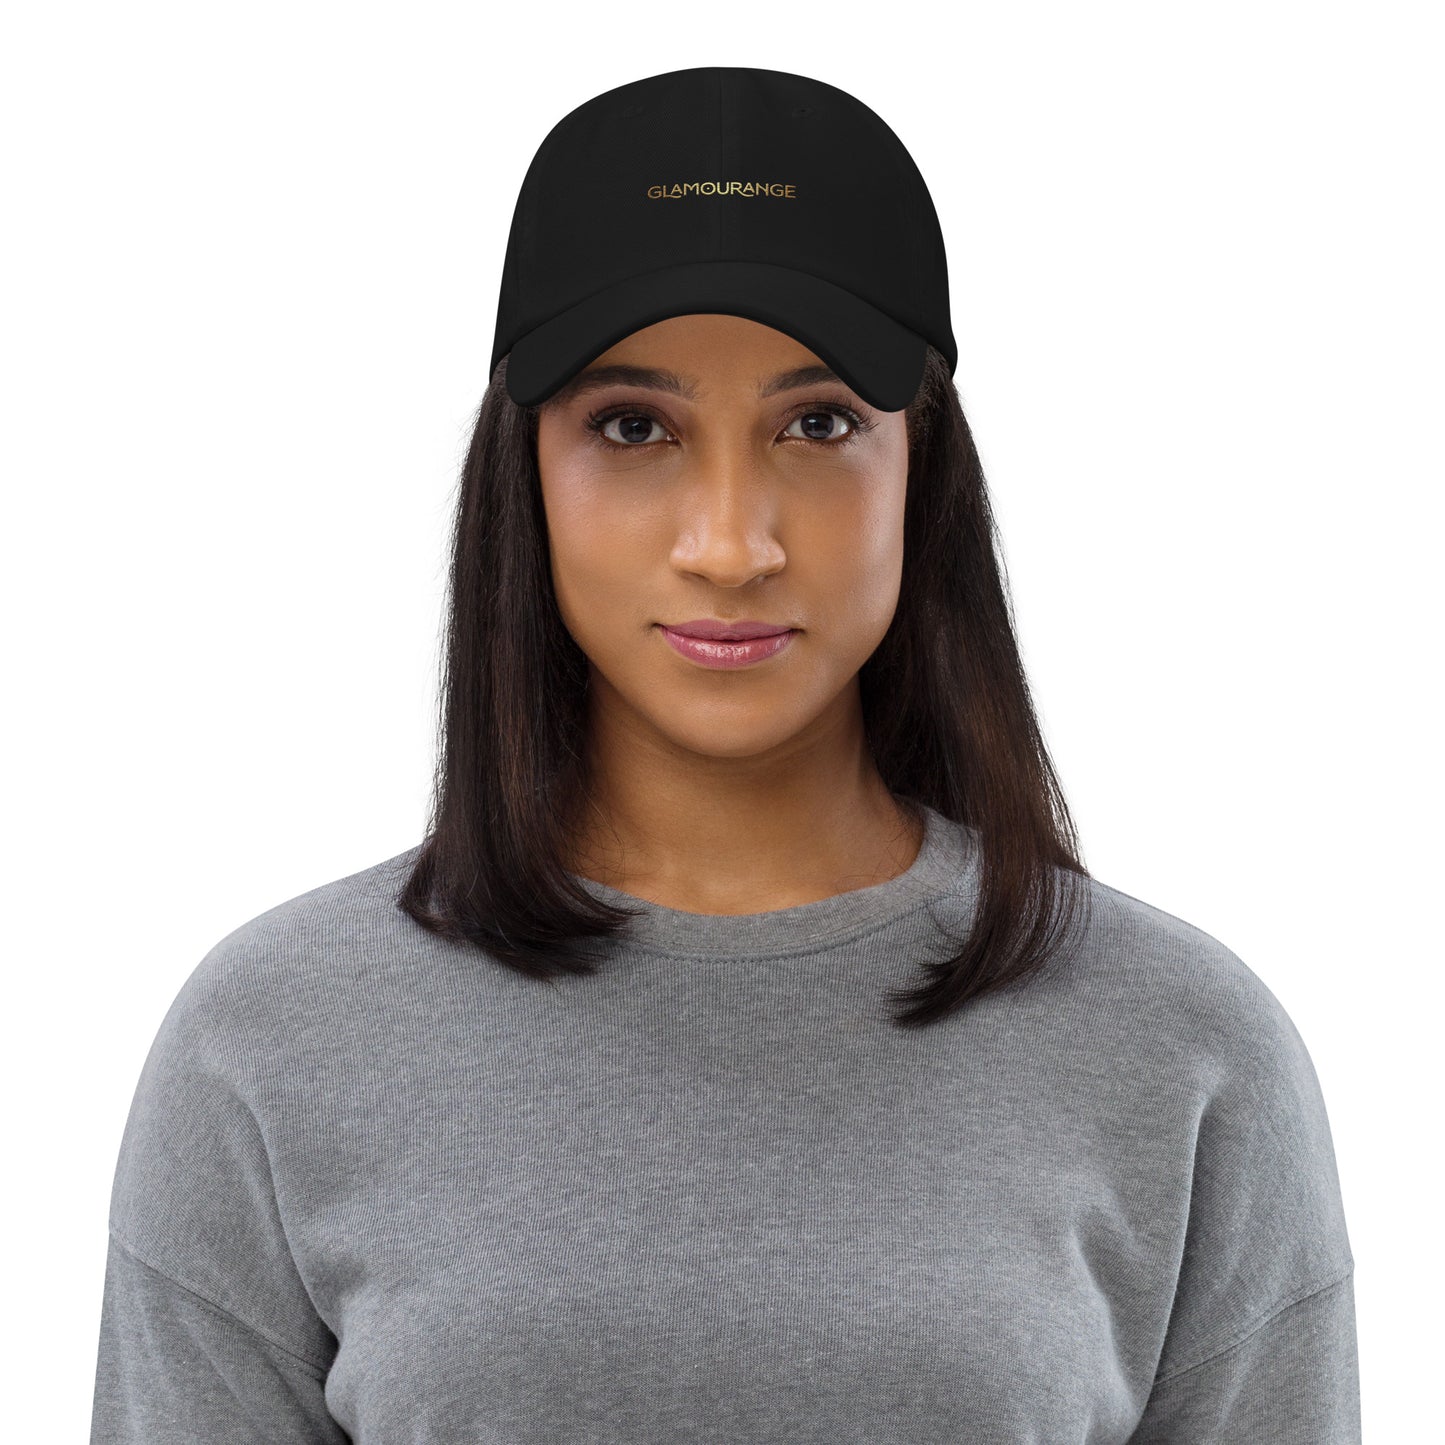 Dad Hat (Glamourange Limited Editions: Small Logo - 002 Model)